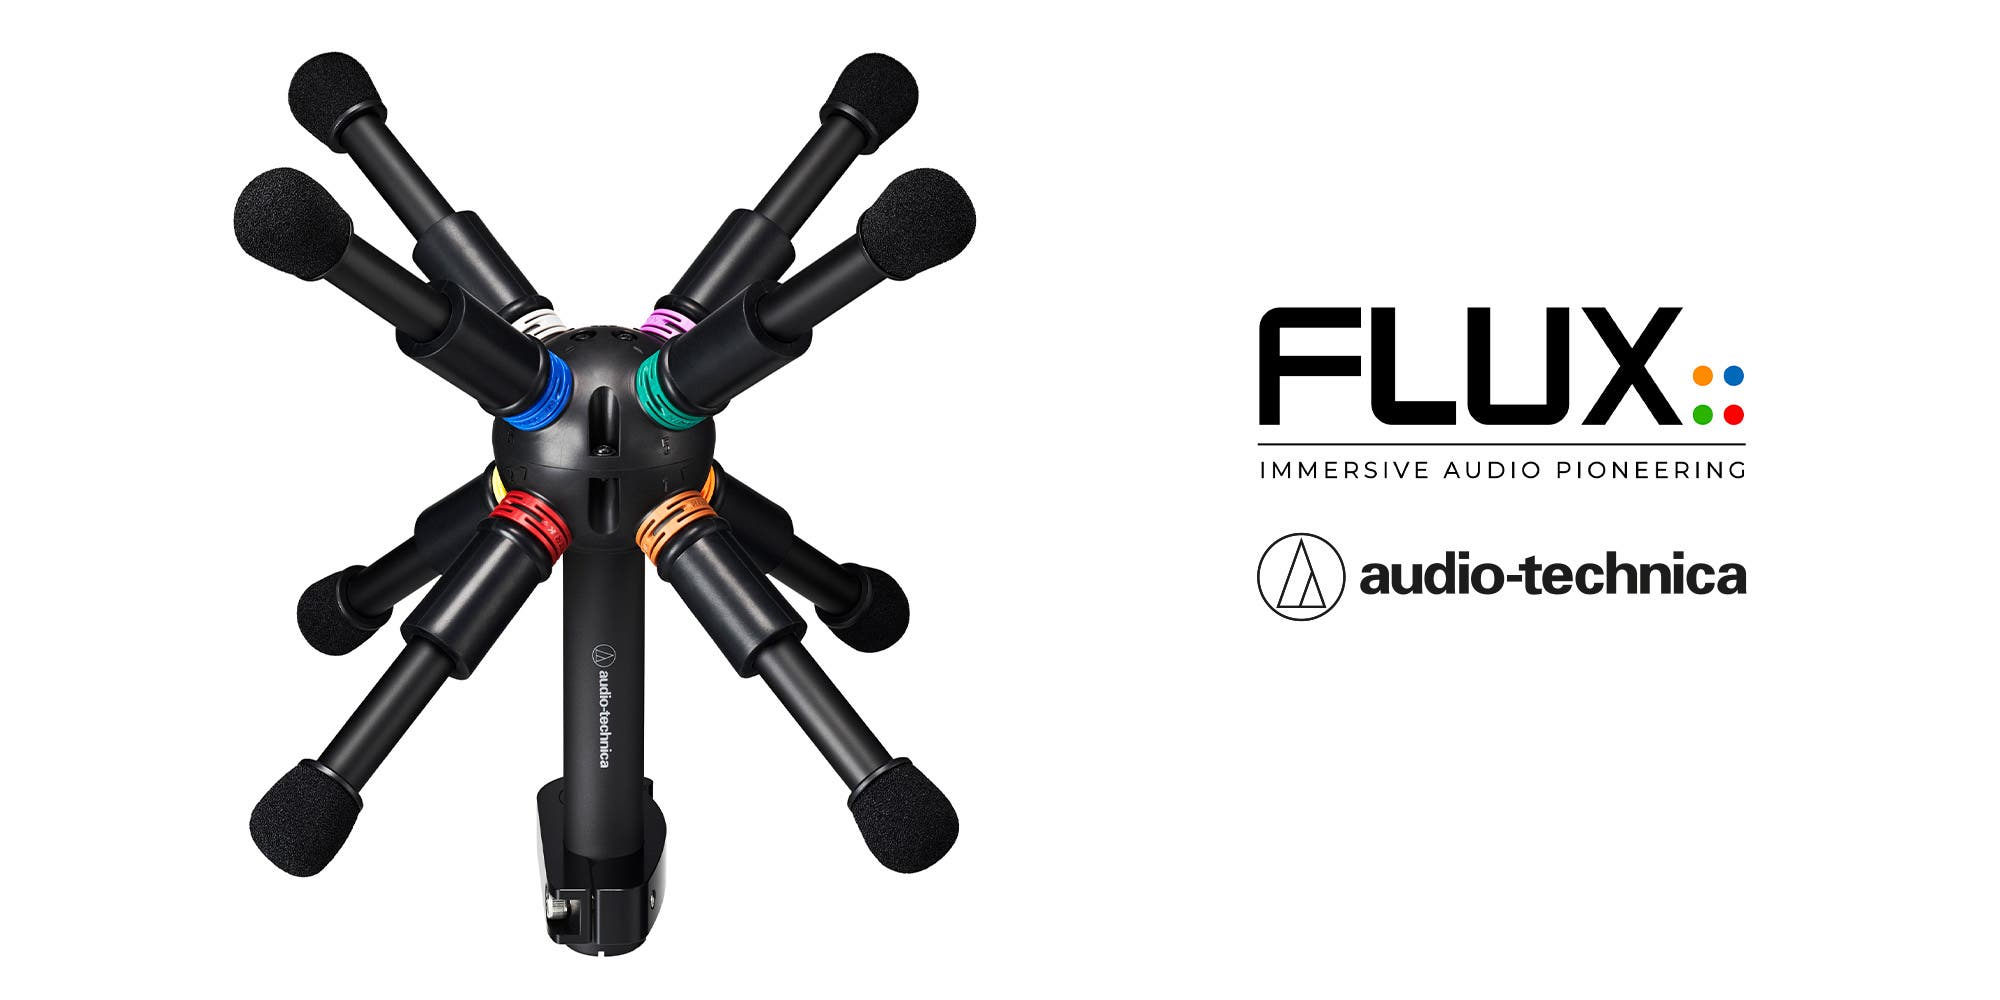  Audio-Technica’s BP3600 Microphone And Flux::Immersive Deliver Powerful Hardware/Software Solution For Immersive Audio